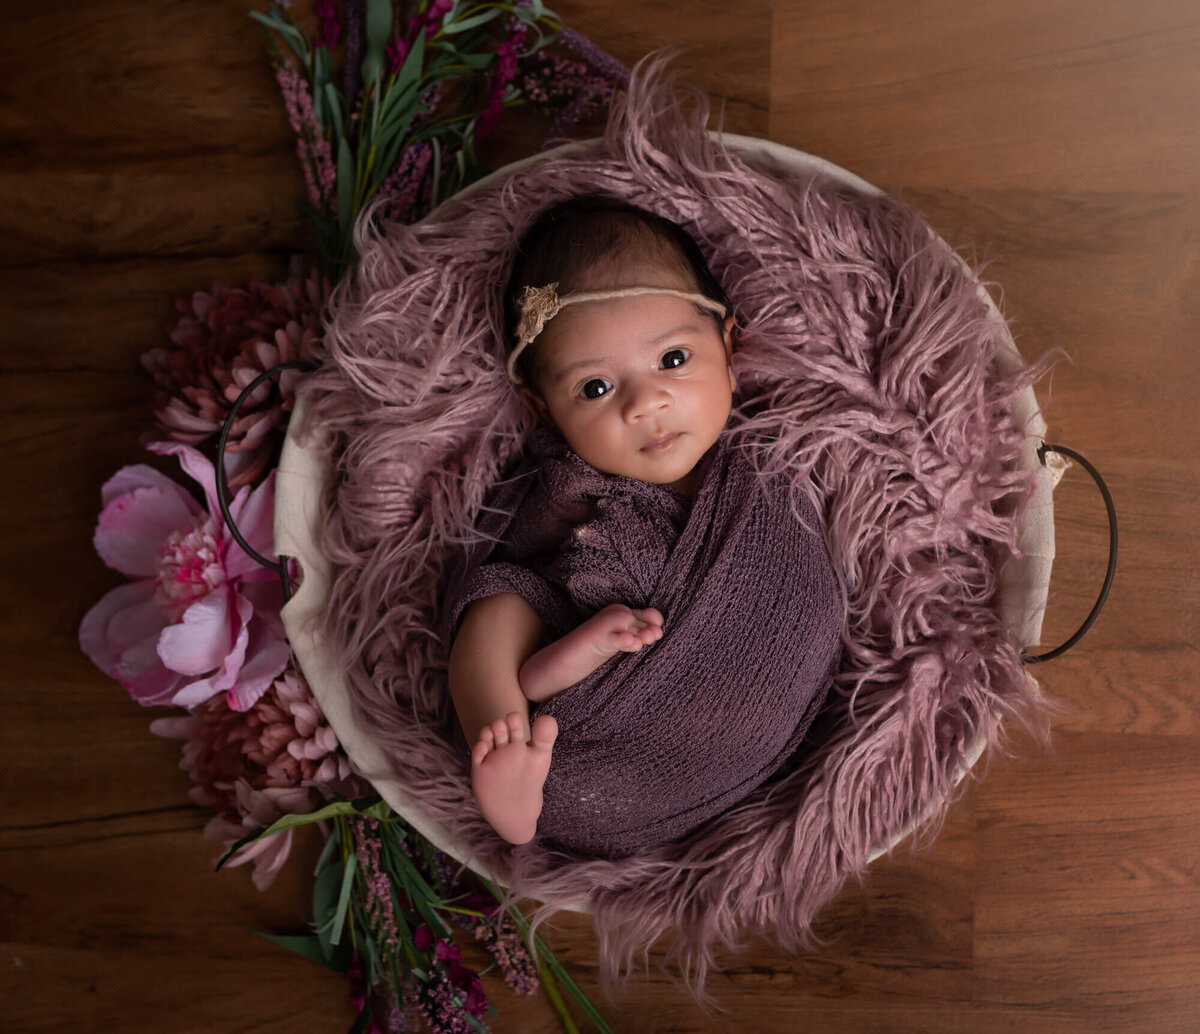 A newborn baby girl wrapped in purple lays in a basket surrounded by purple blankets